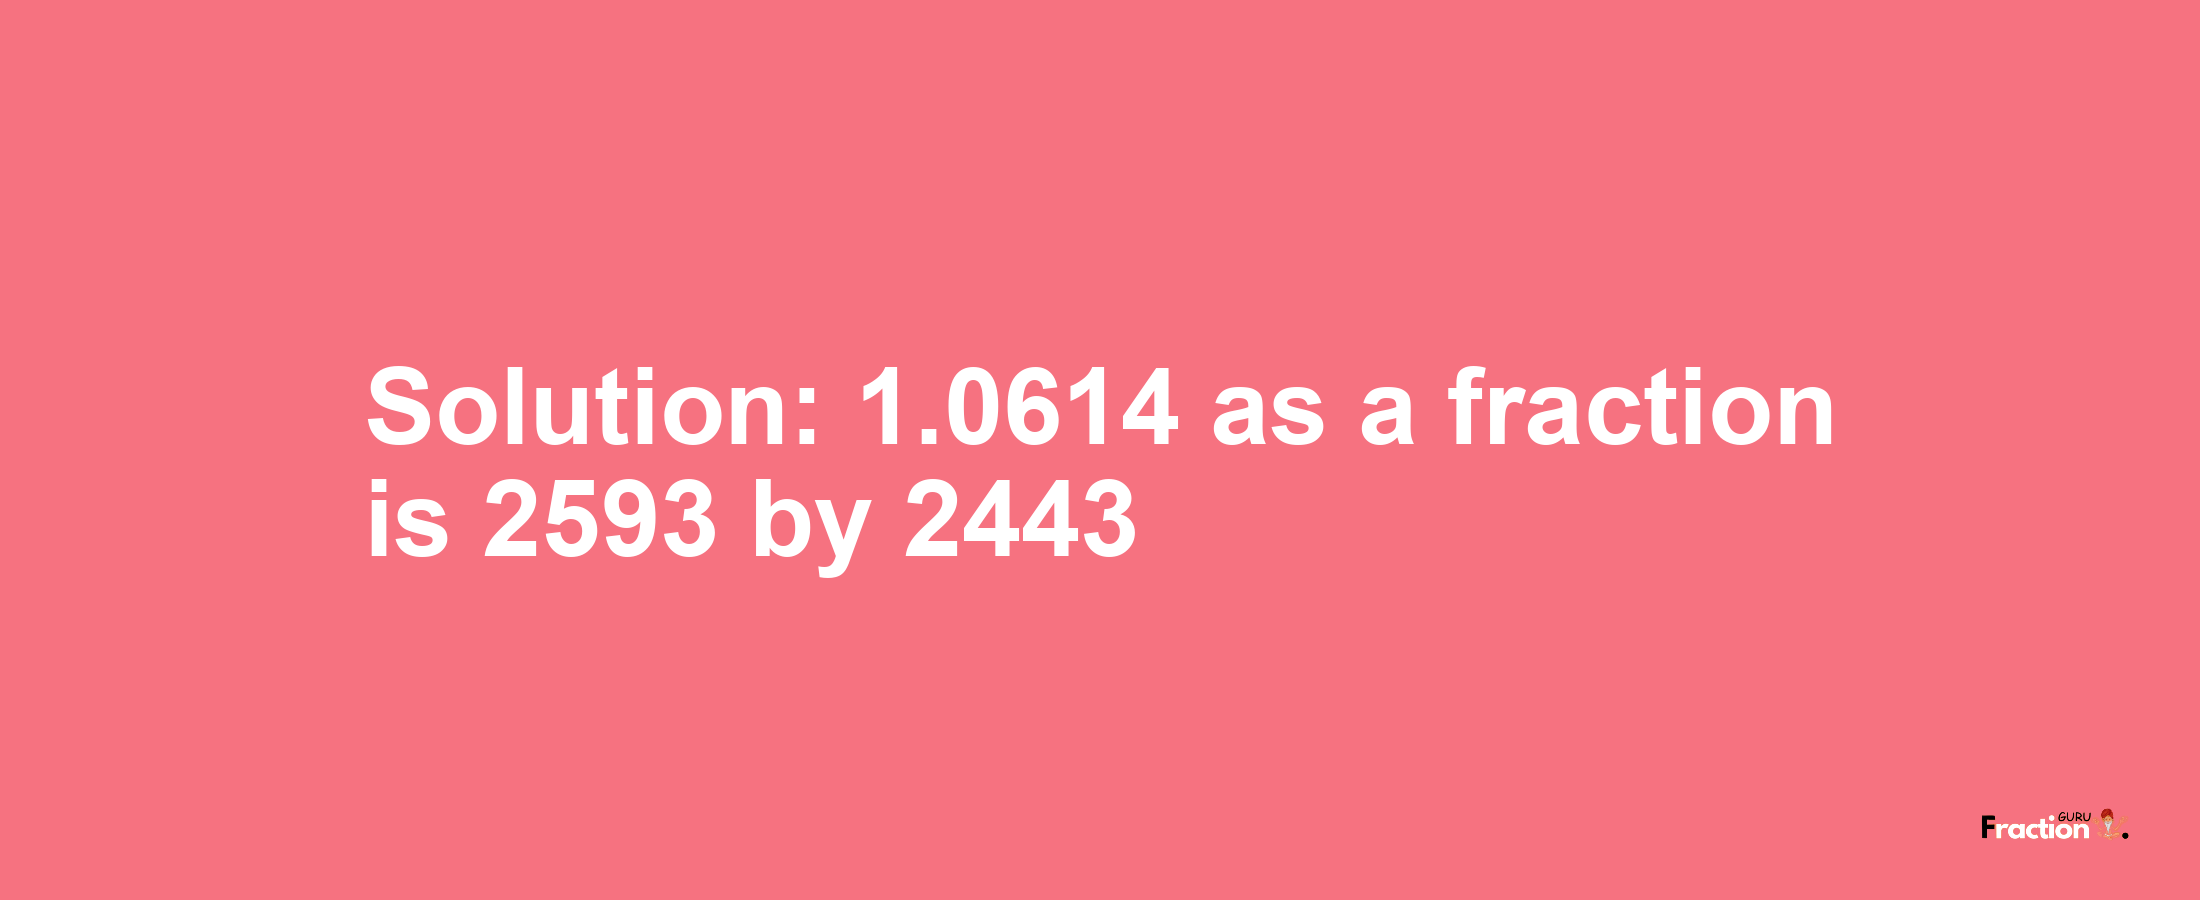 Solution:1.0614 as a fraction is 2593/2443